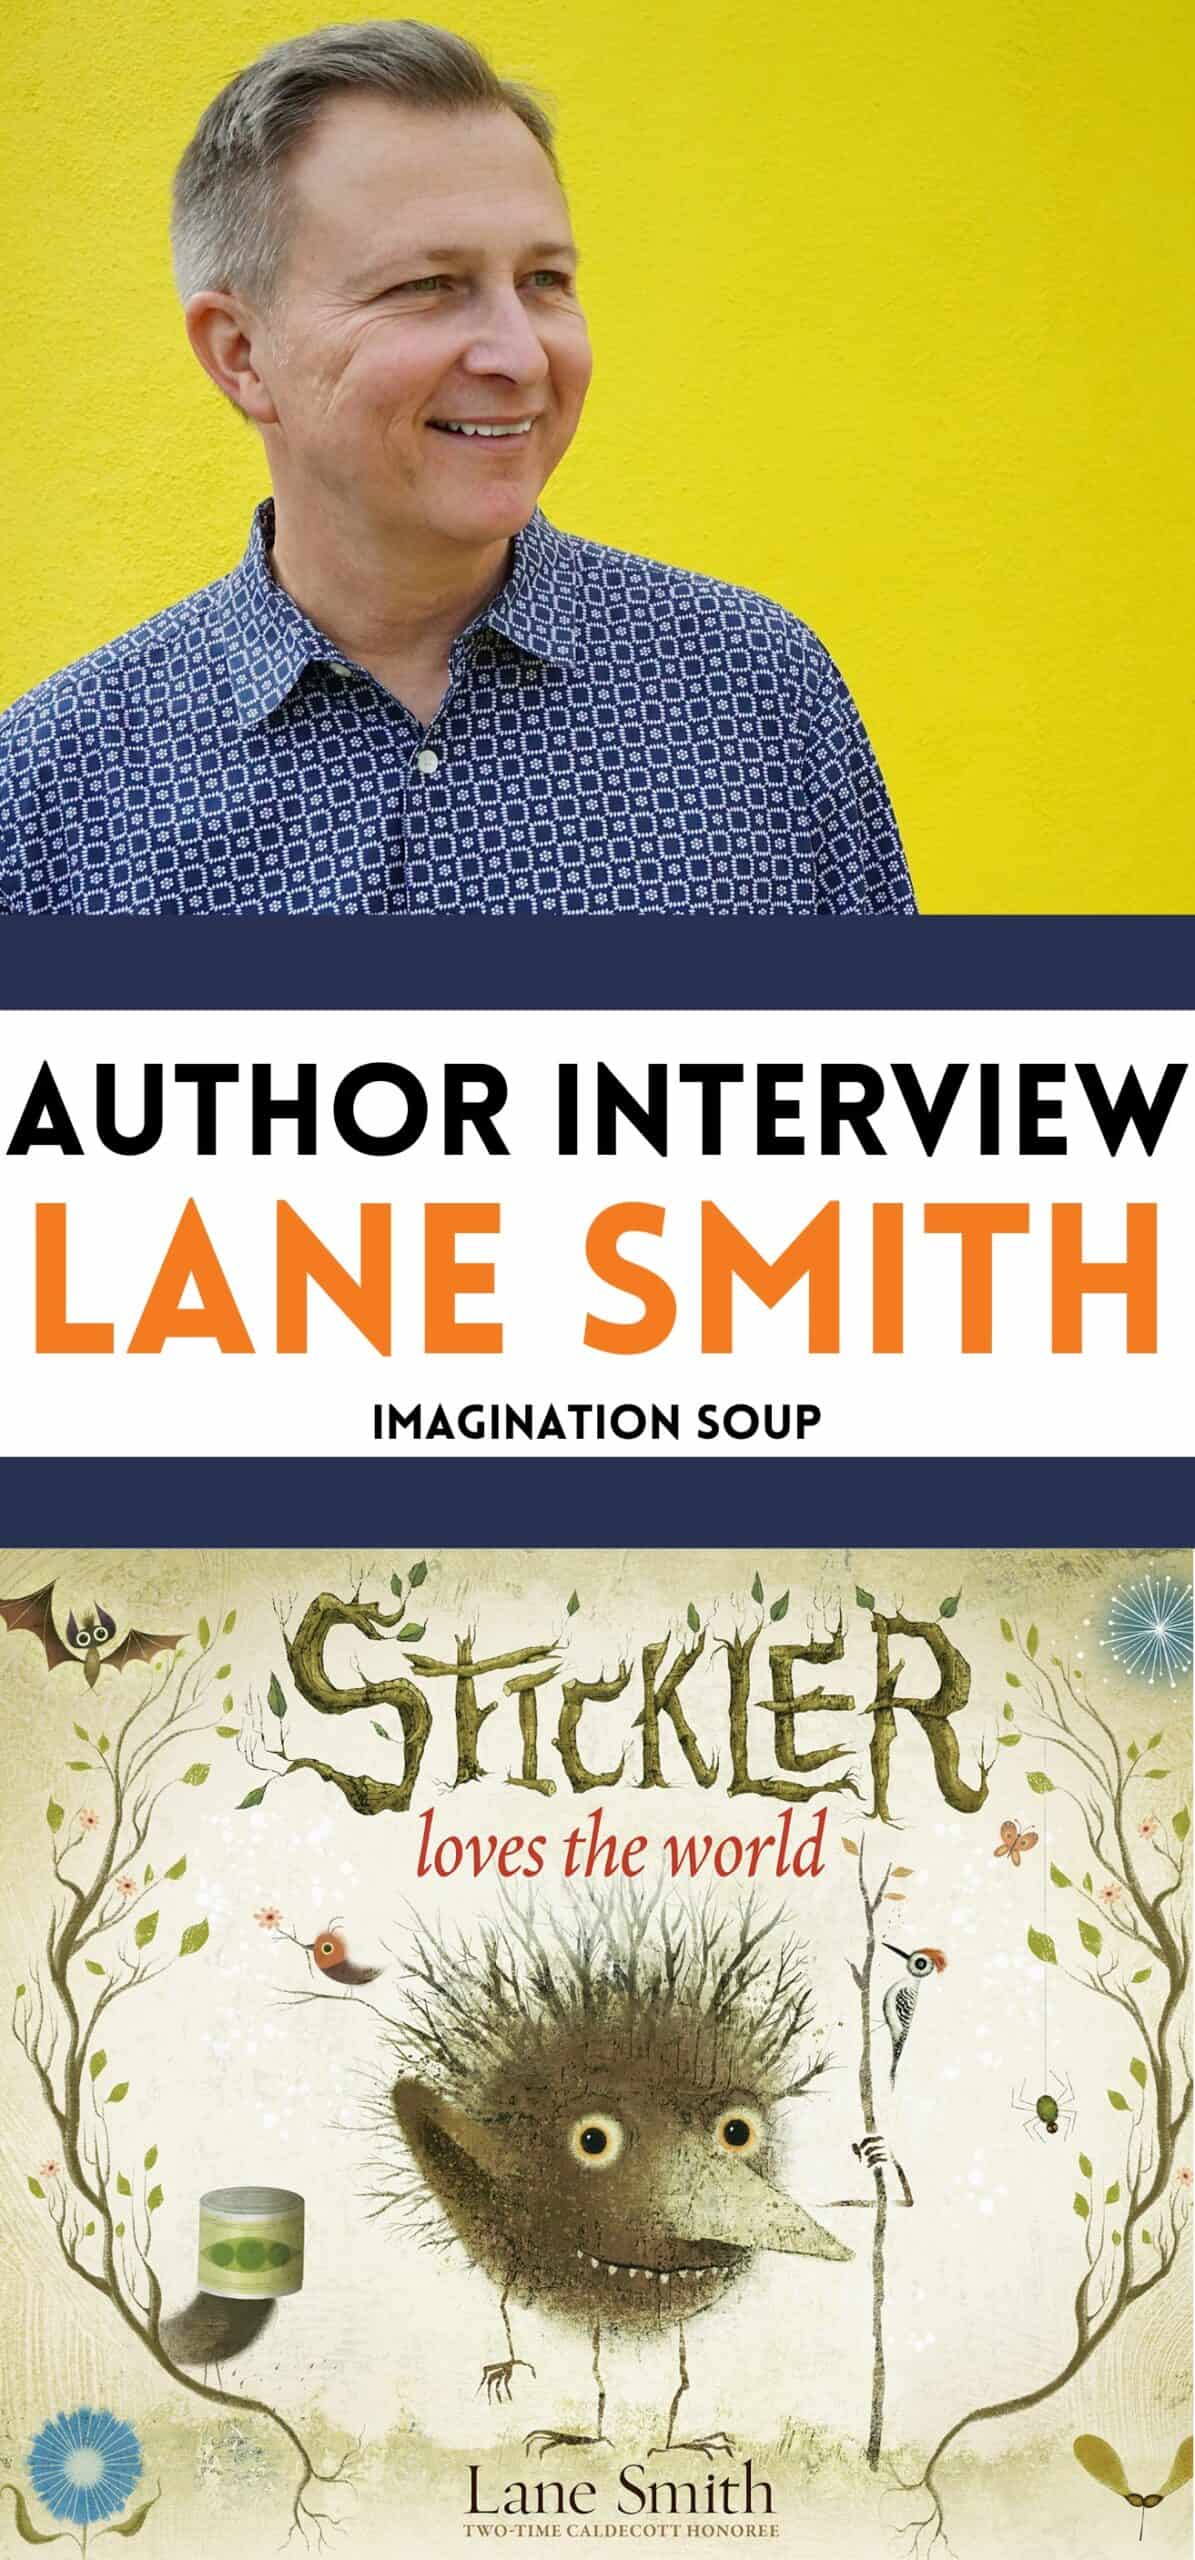 interview with author Lane Smith about his new picture book, STICKLER LOVES THE WORLD 